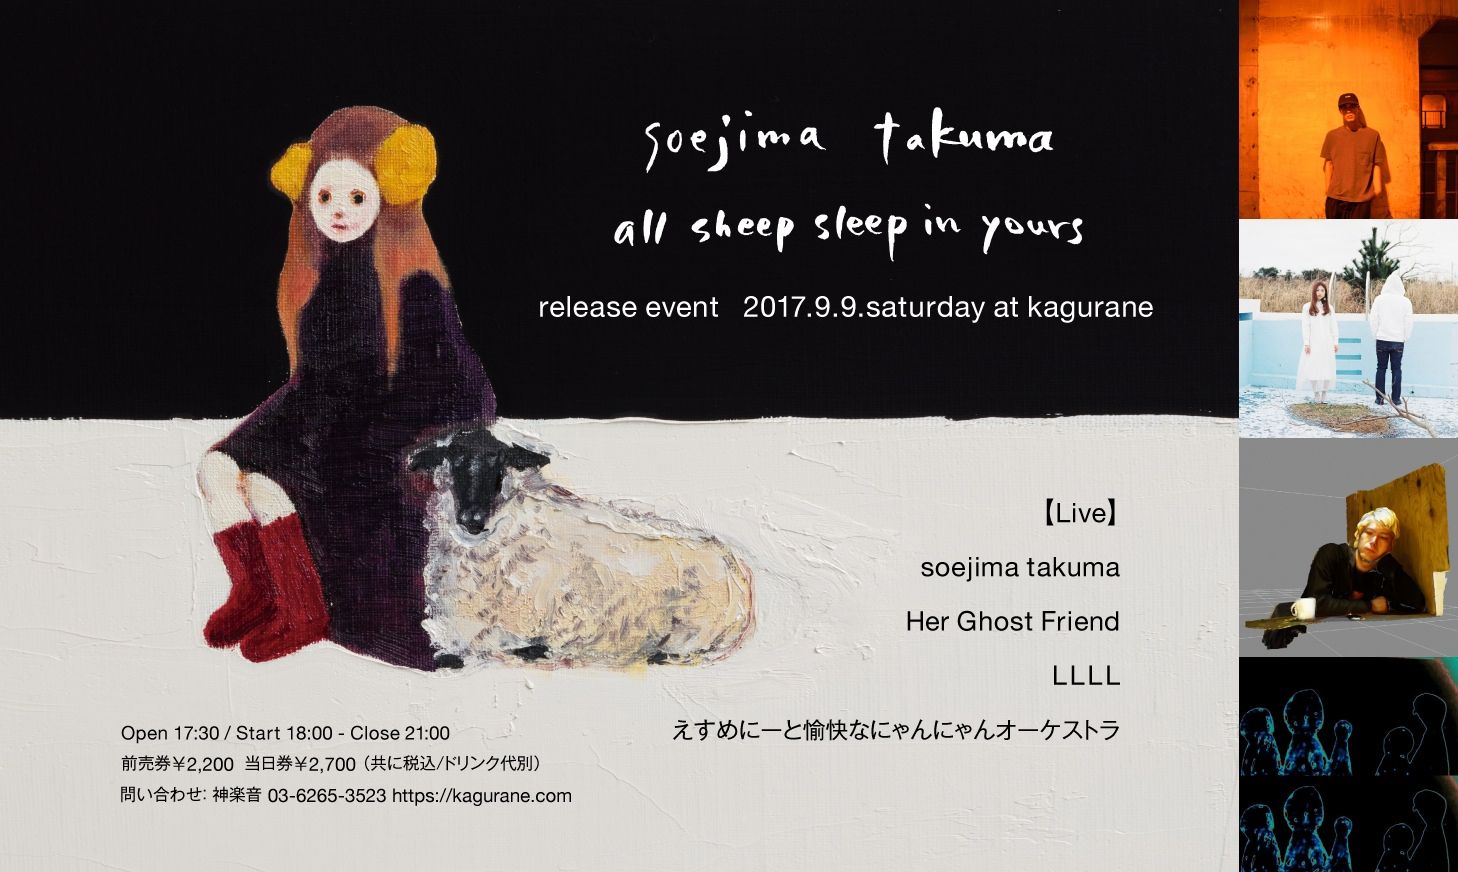 "all sheep sleep in yours" release event